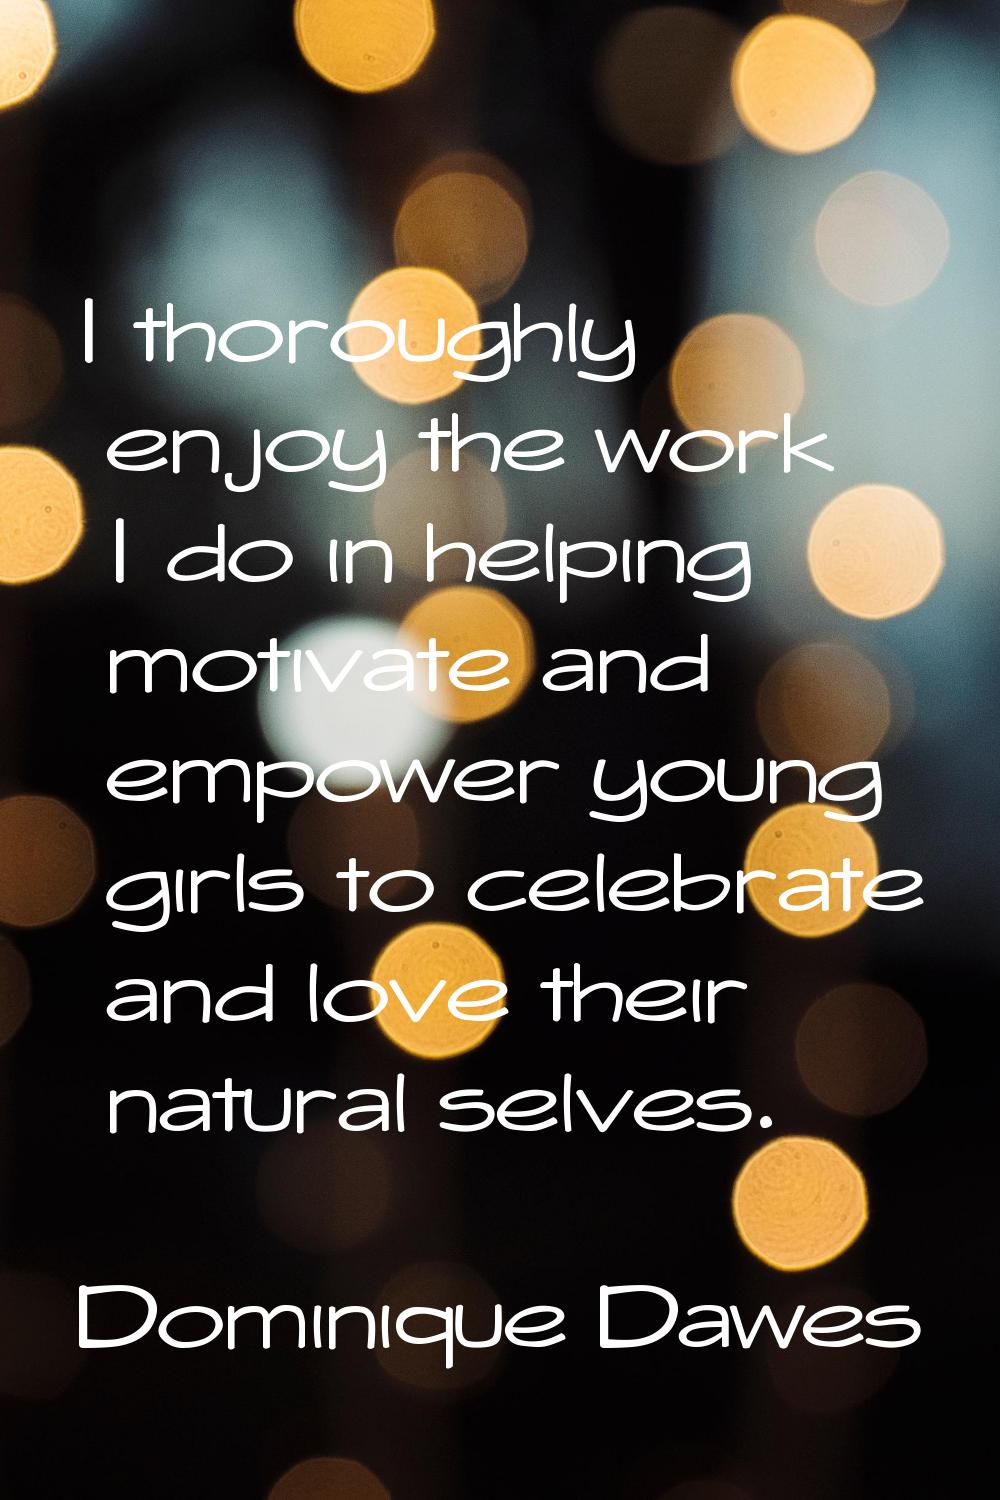 I thoroughly enjoy the work I do in helping motivate and empower young girls to celebrate and love 